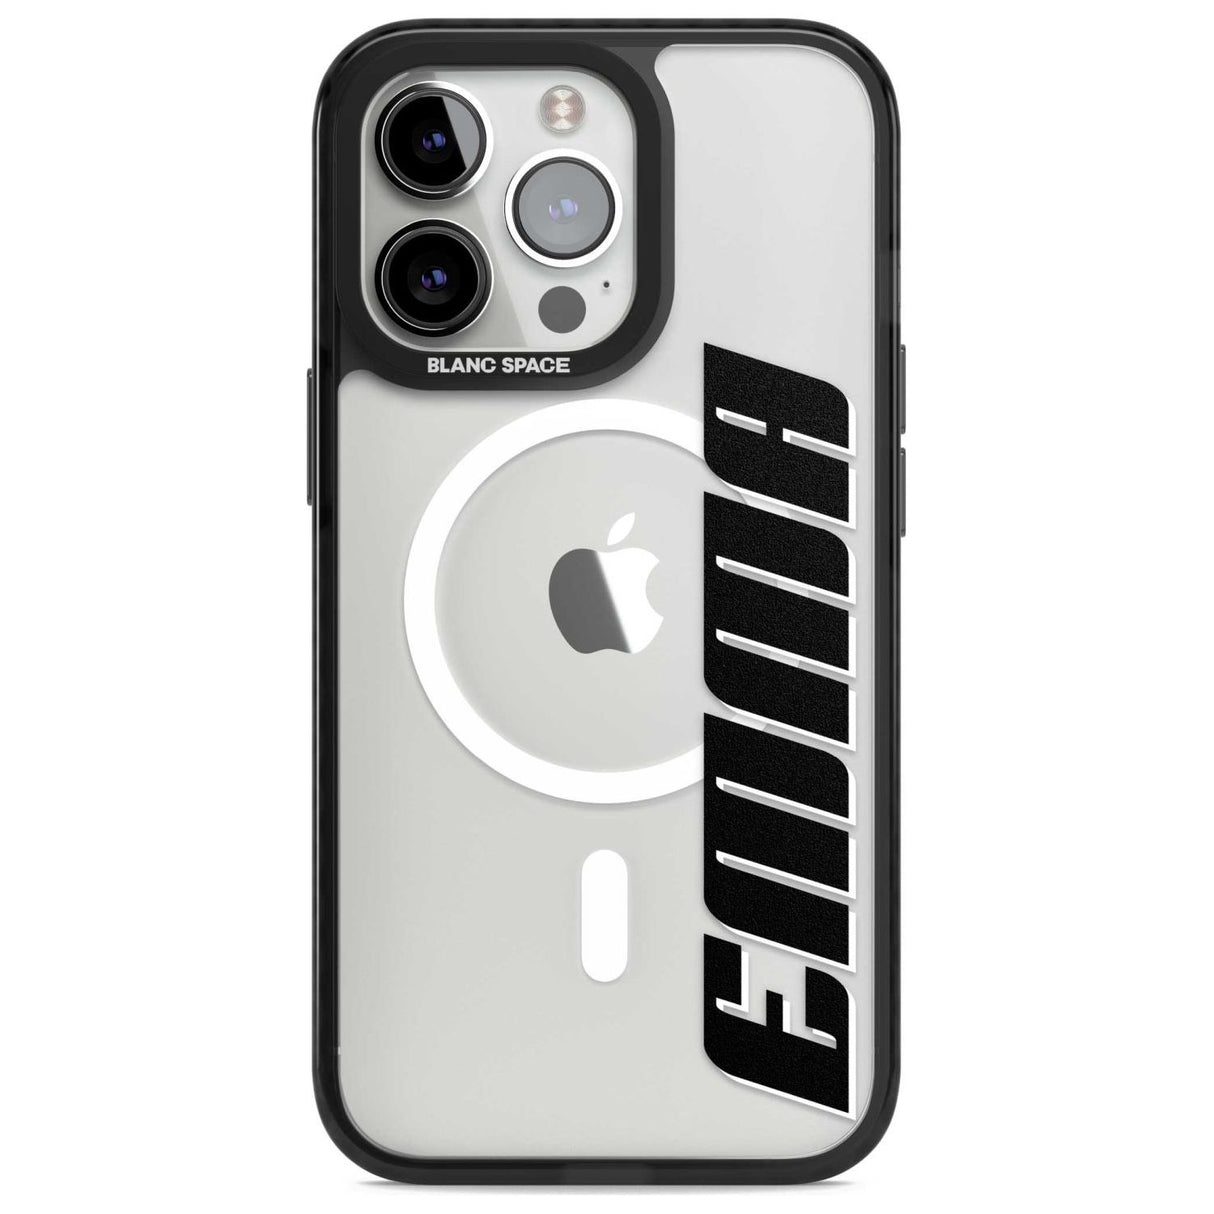 Personalised Clear Text  4A Custom Phone Case iPhone 15 Pro Max / Magsafe Black Impact Case,iPhone 15 Pro / Magsafe Black Impact Case,iPhone 14 Pro Max / Magsafe Black Impact Case,iPhone 14 Pro / Magsafe Black Impact Case,iPhone 13 Pro / Magsafe Black Impact Case Blanc Space